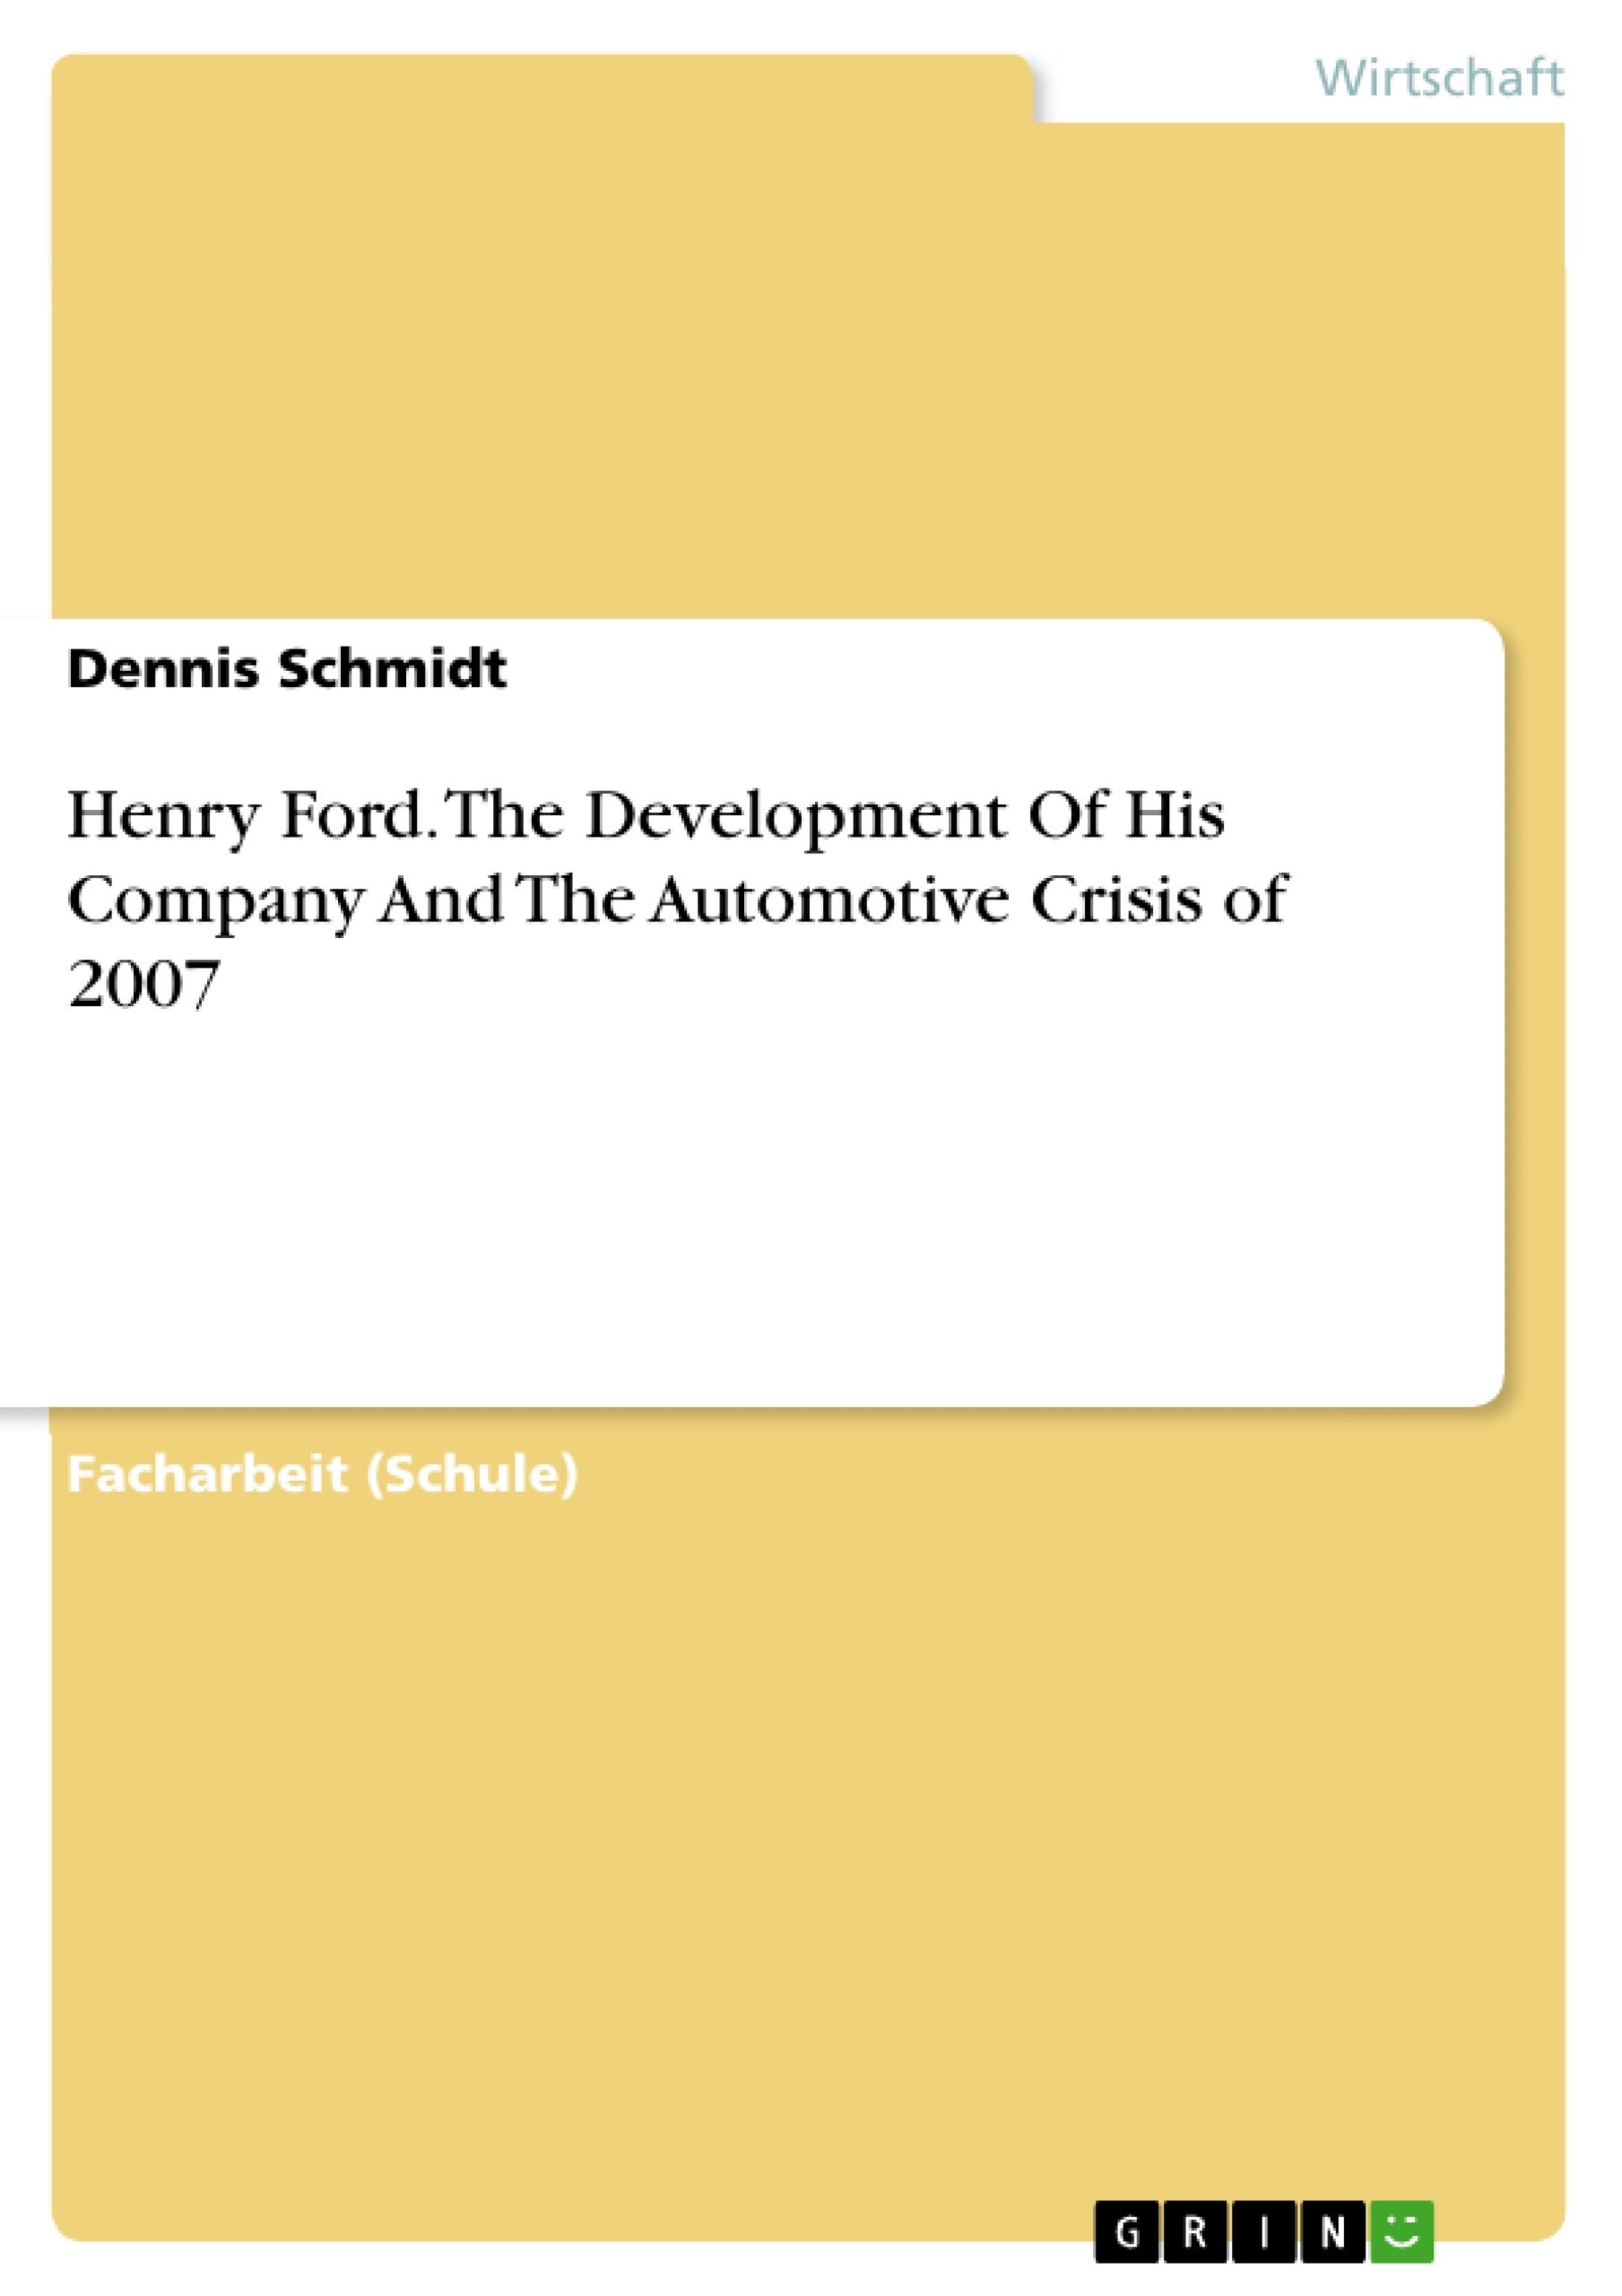 Título: Henry Ford. The Development Of His Company And The Automotive Crisis of 2007